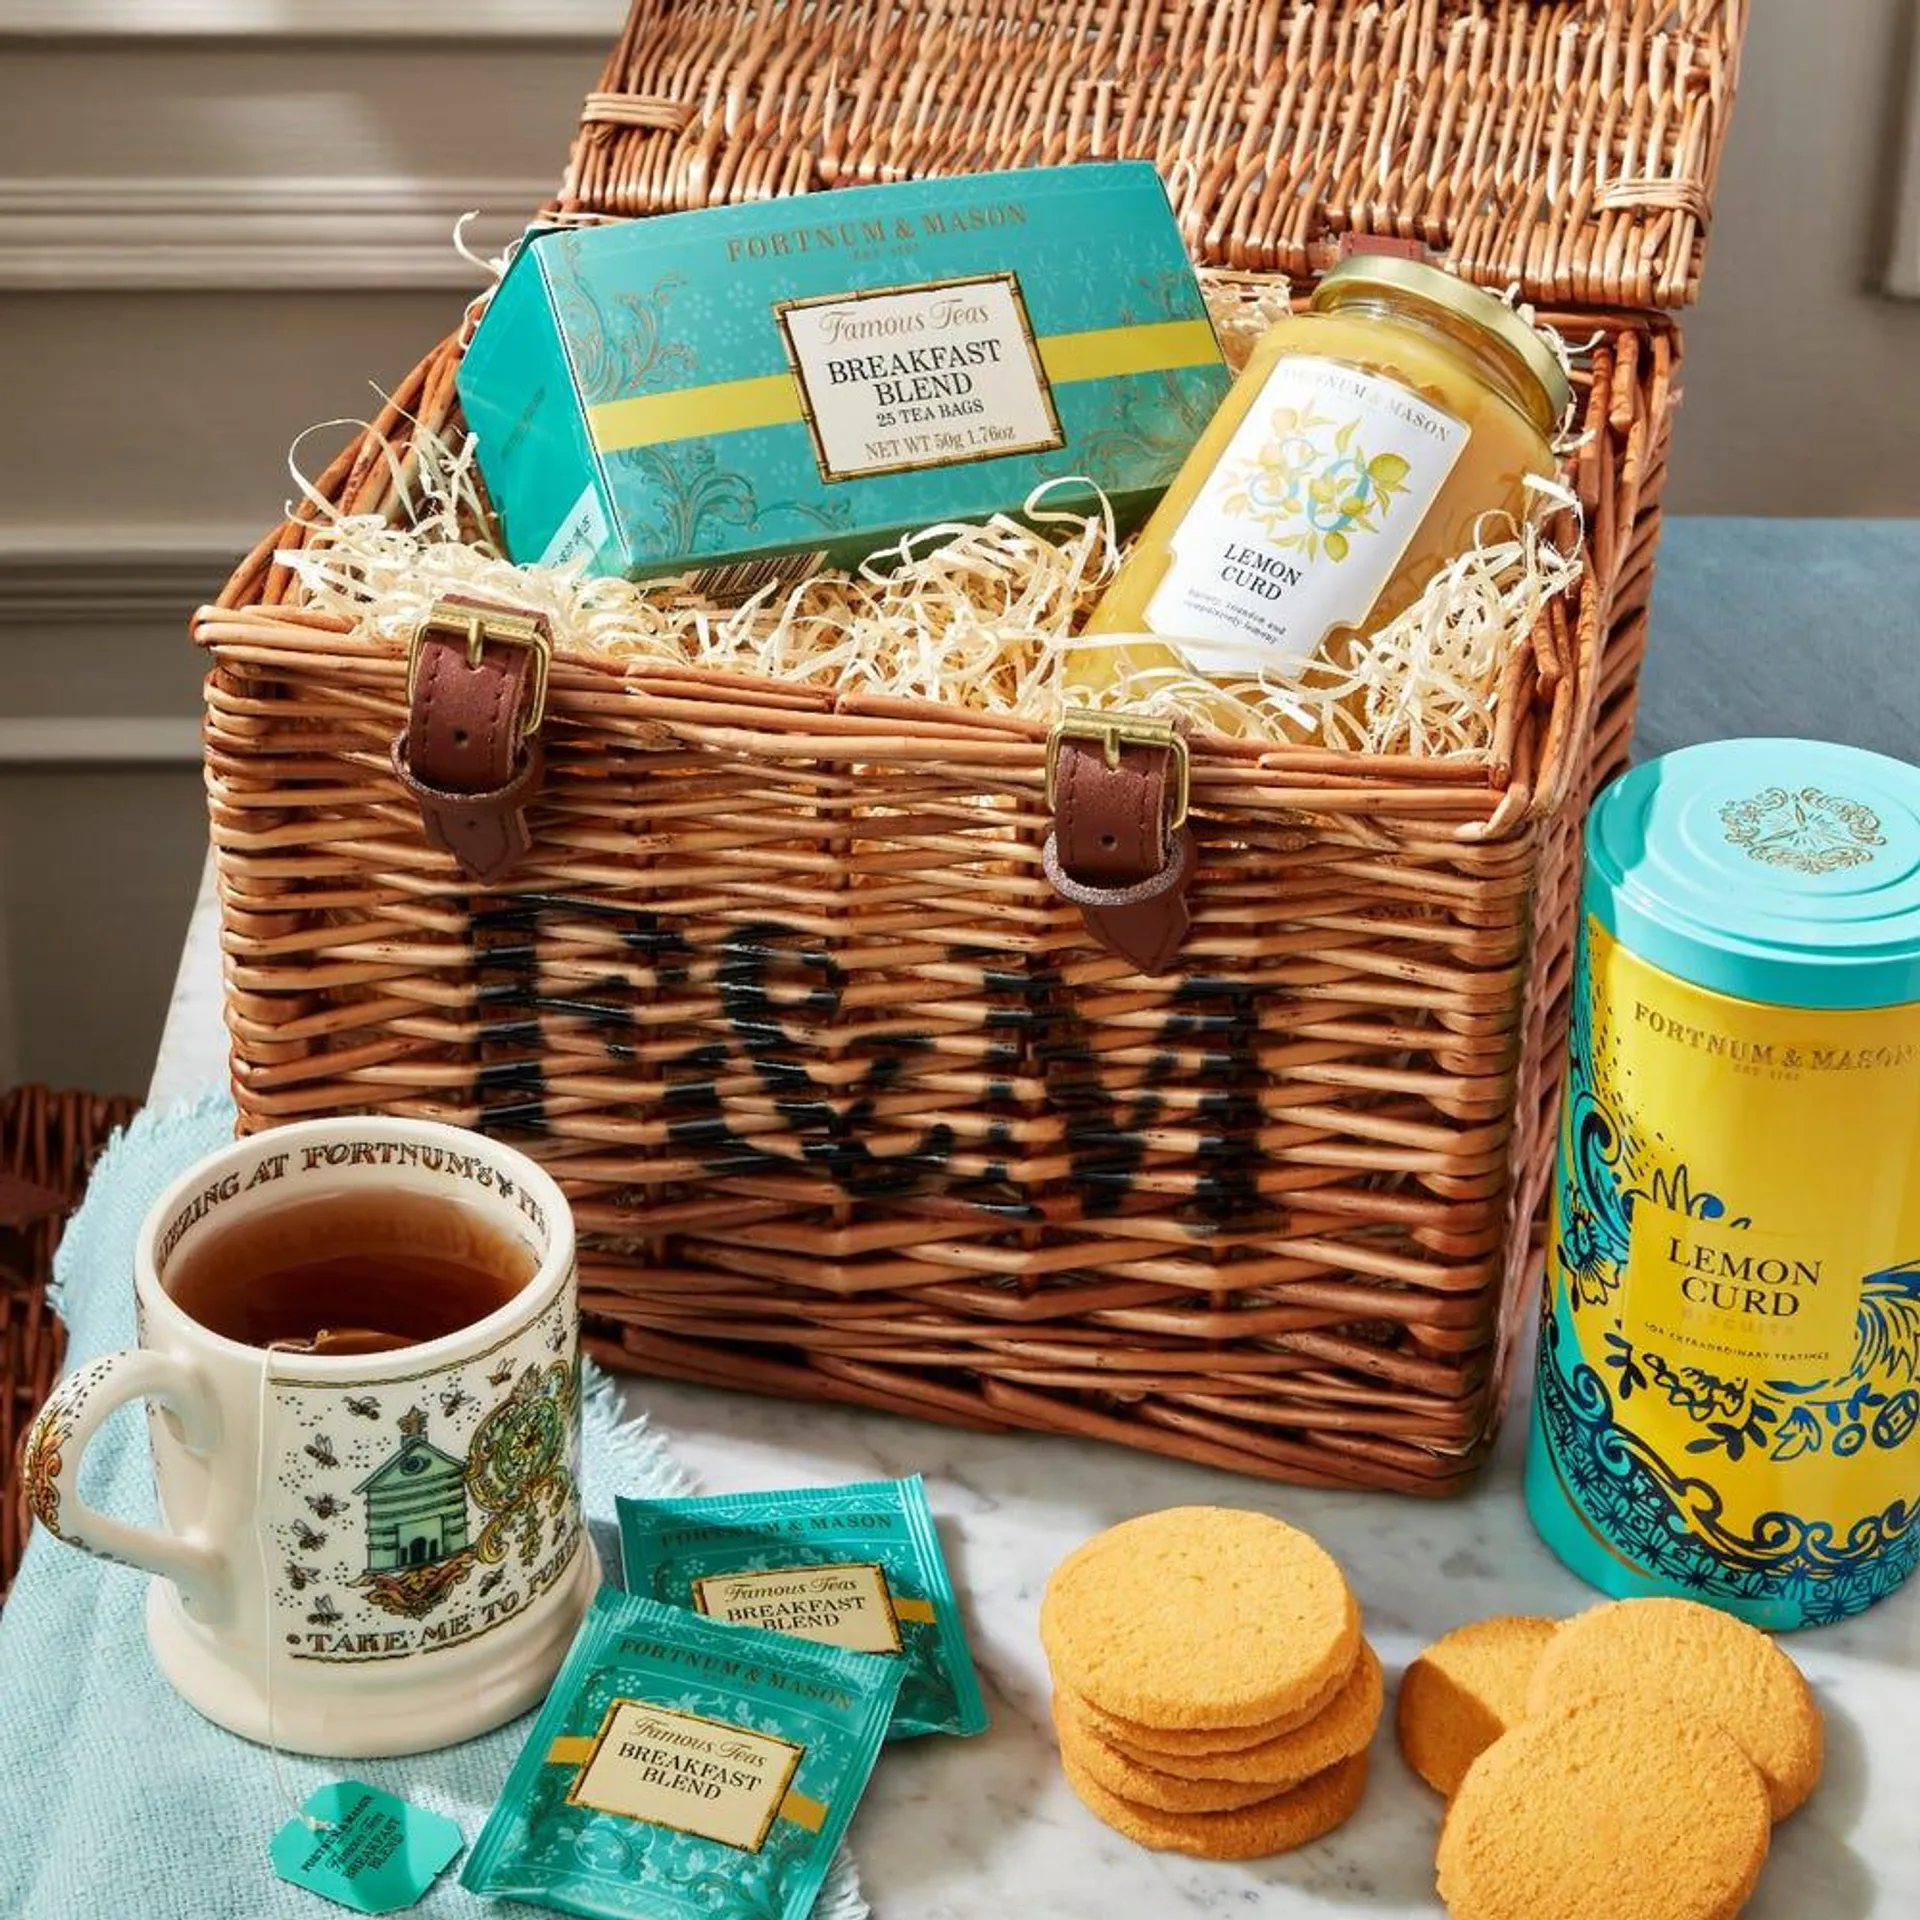 The Take Me to Fortnum's Hamper